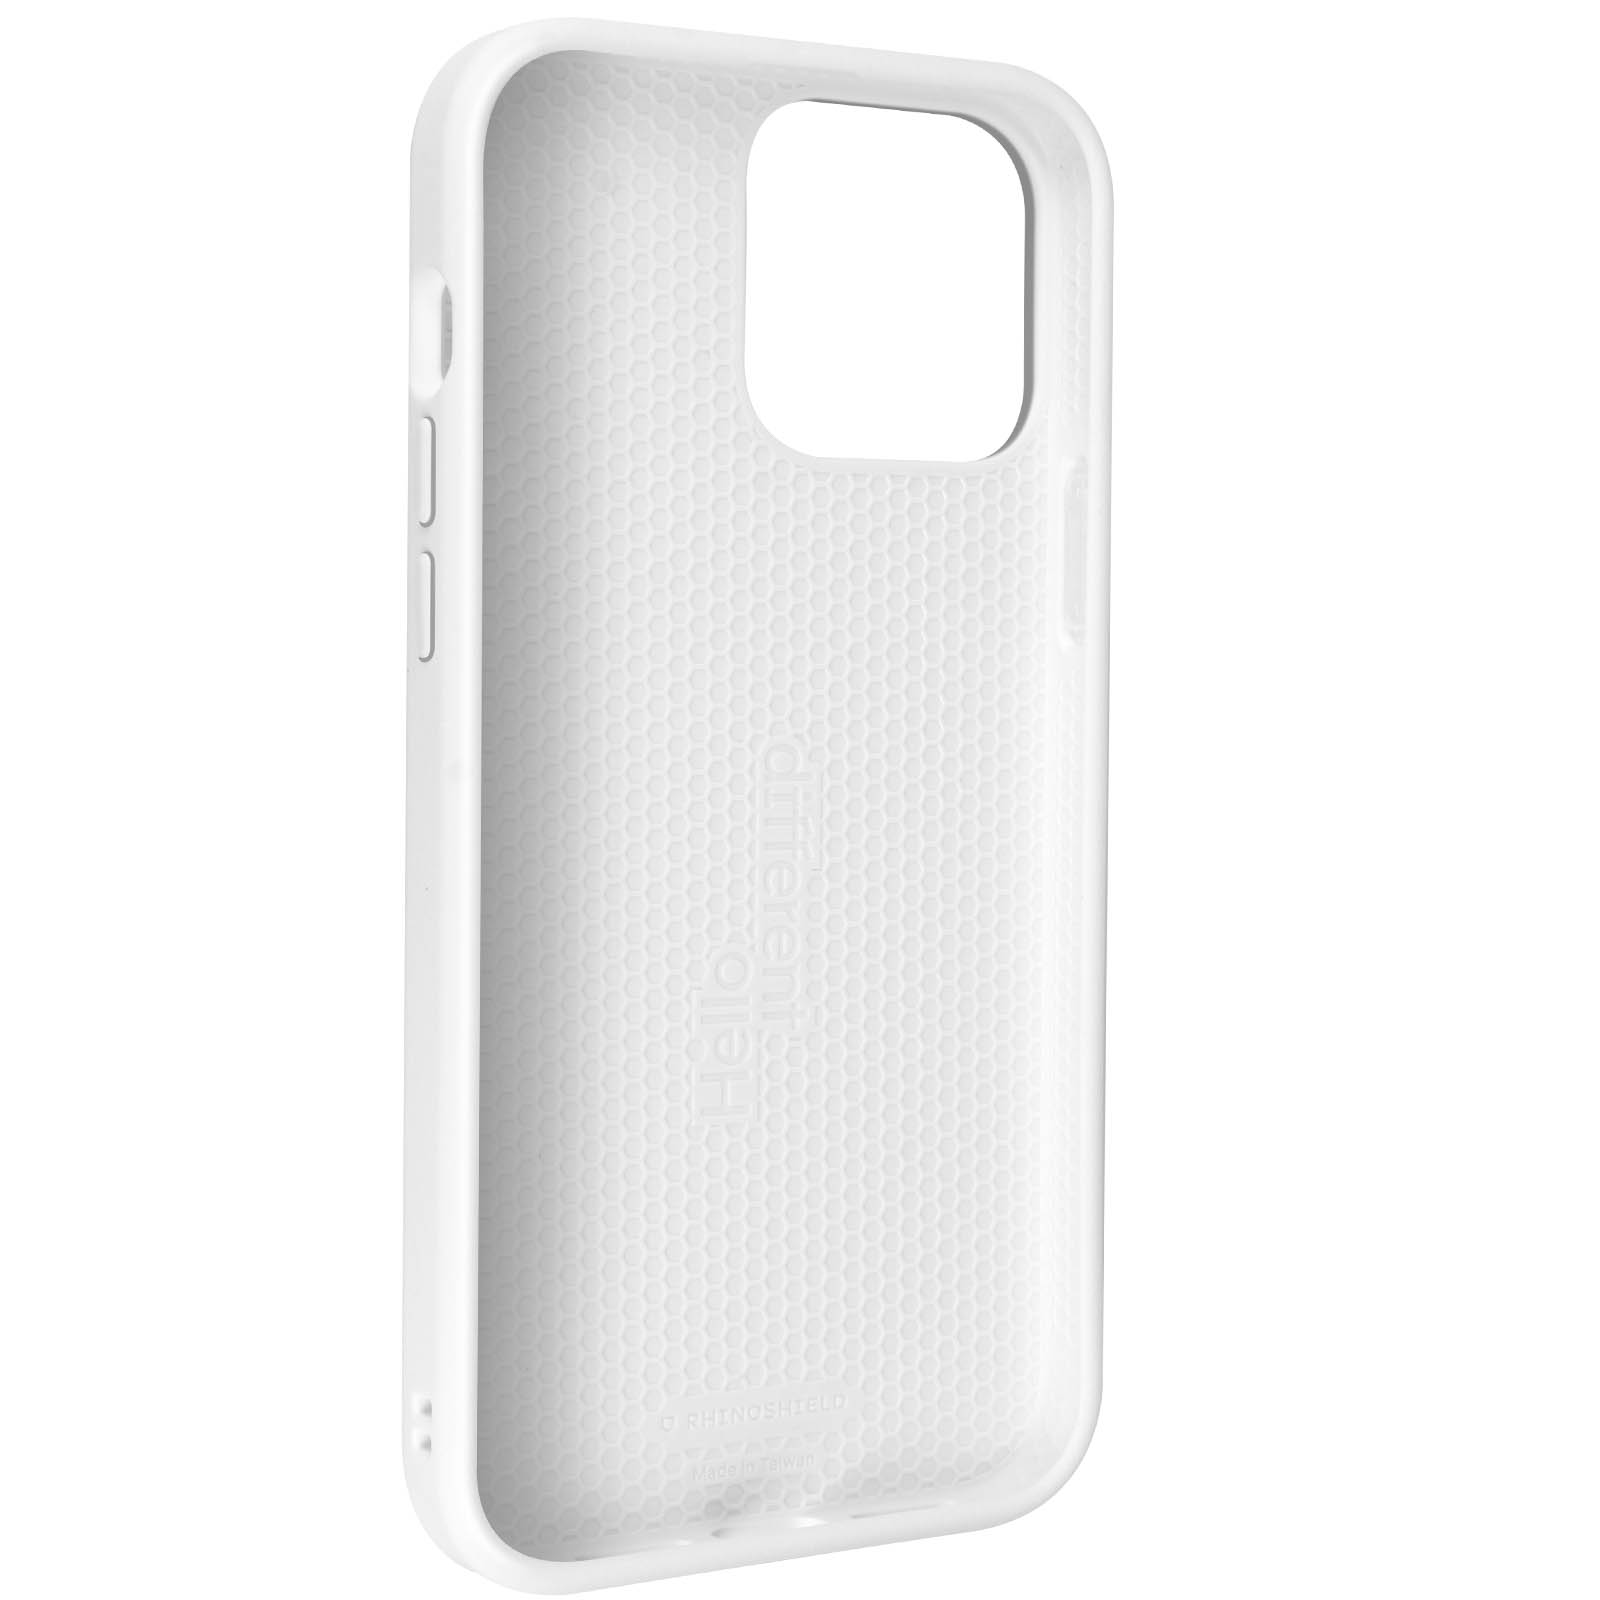 Backcover, RHINOSHIELD Series, 13 Apple, Weiß Pro SolidSuit iPhone Max,